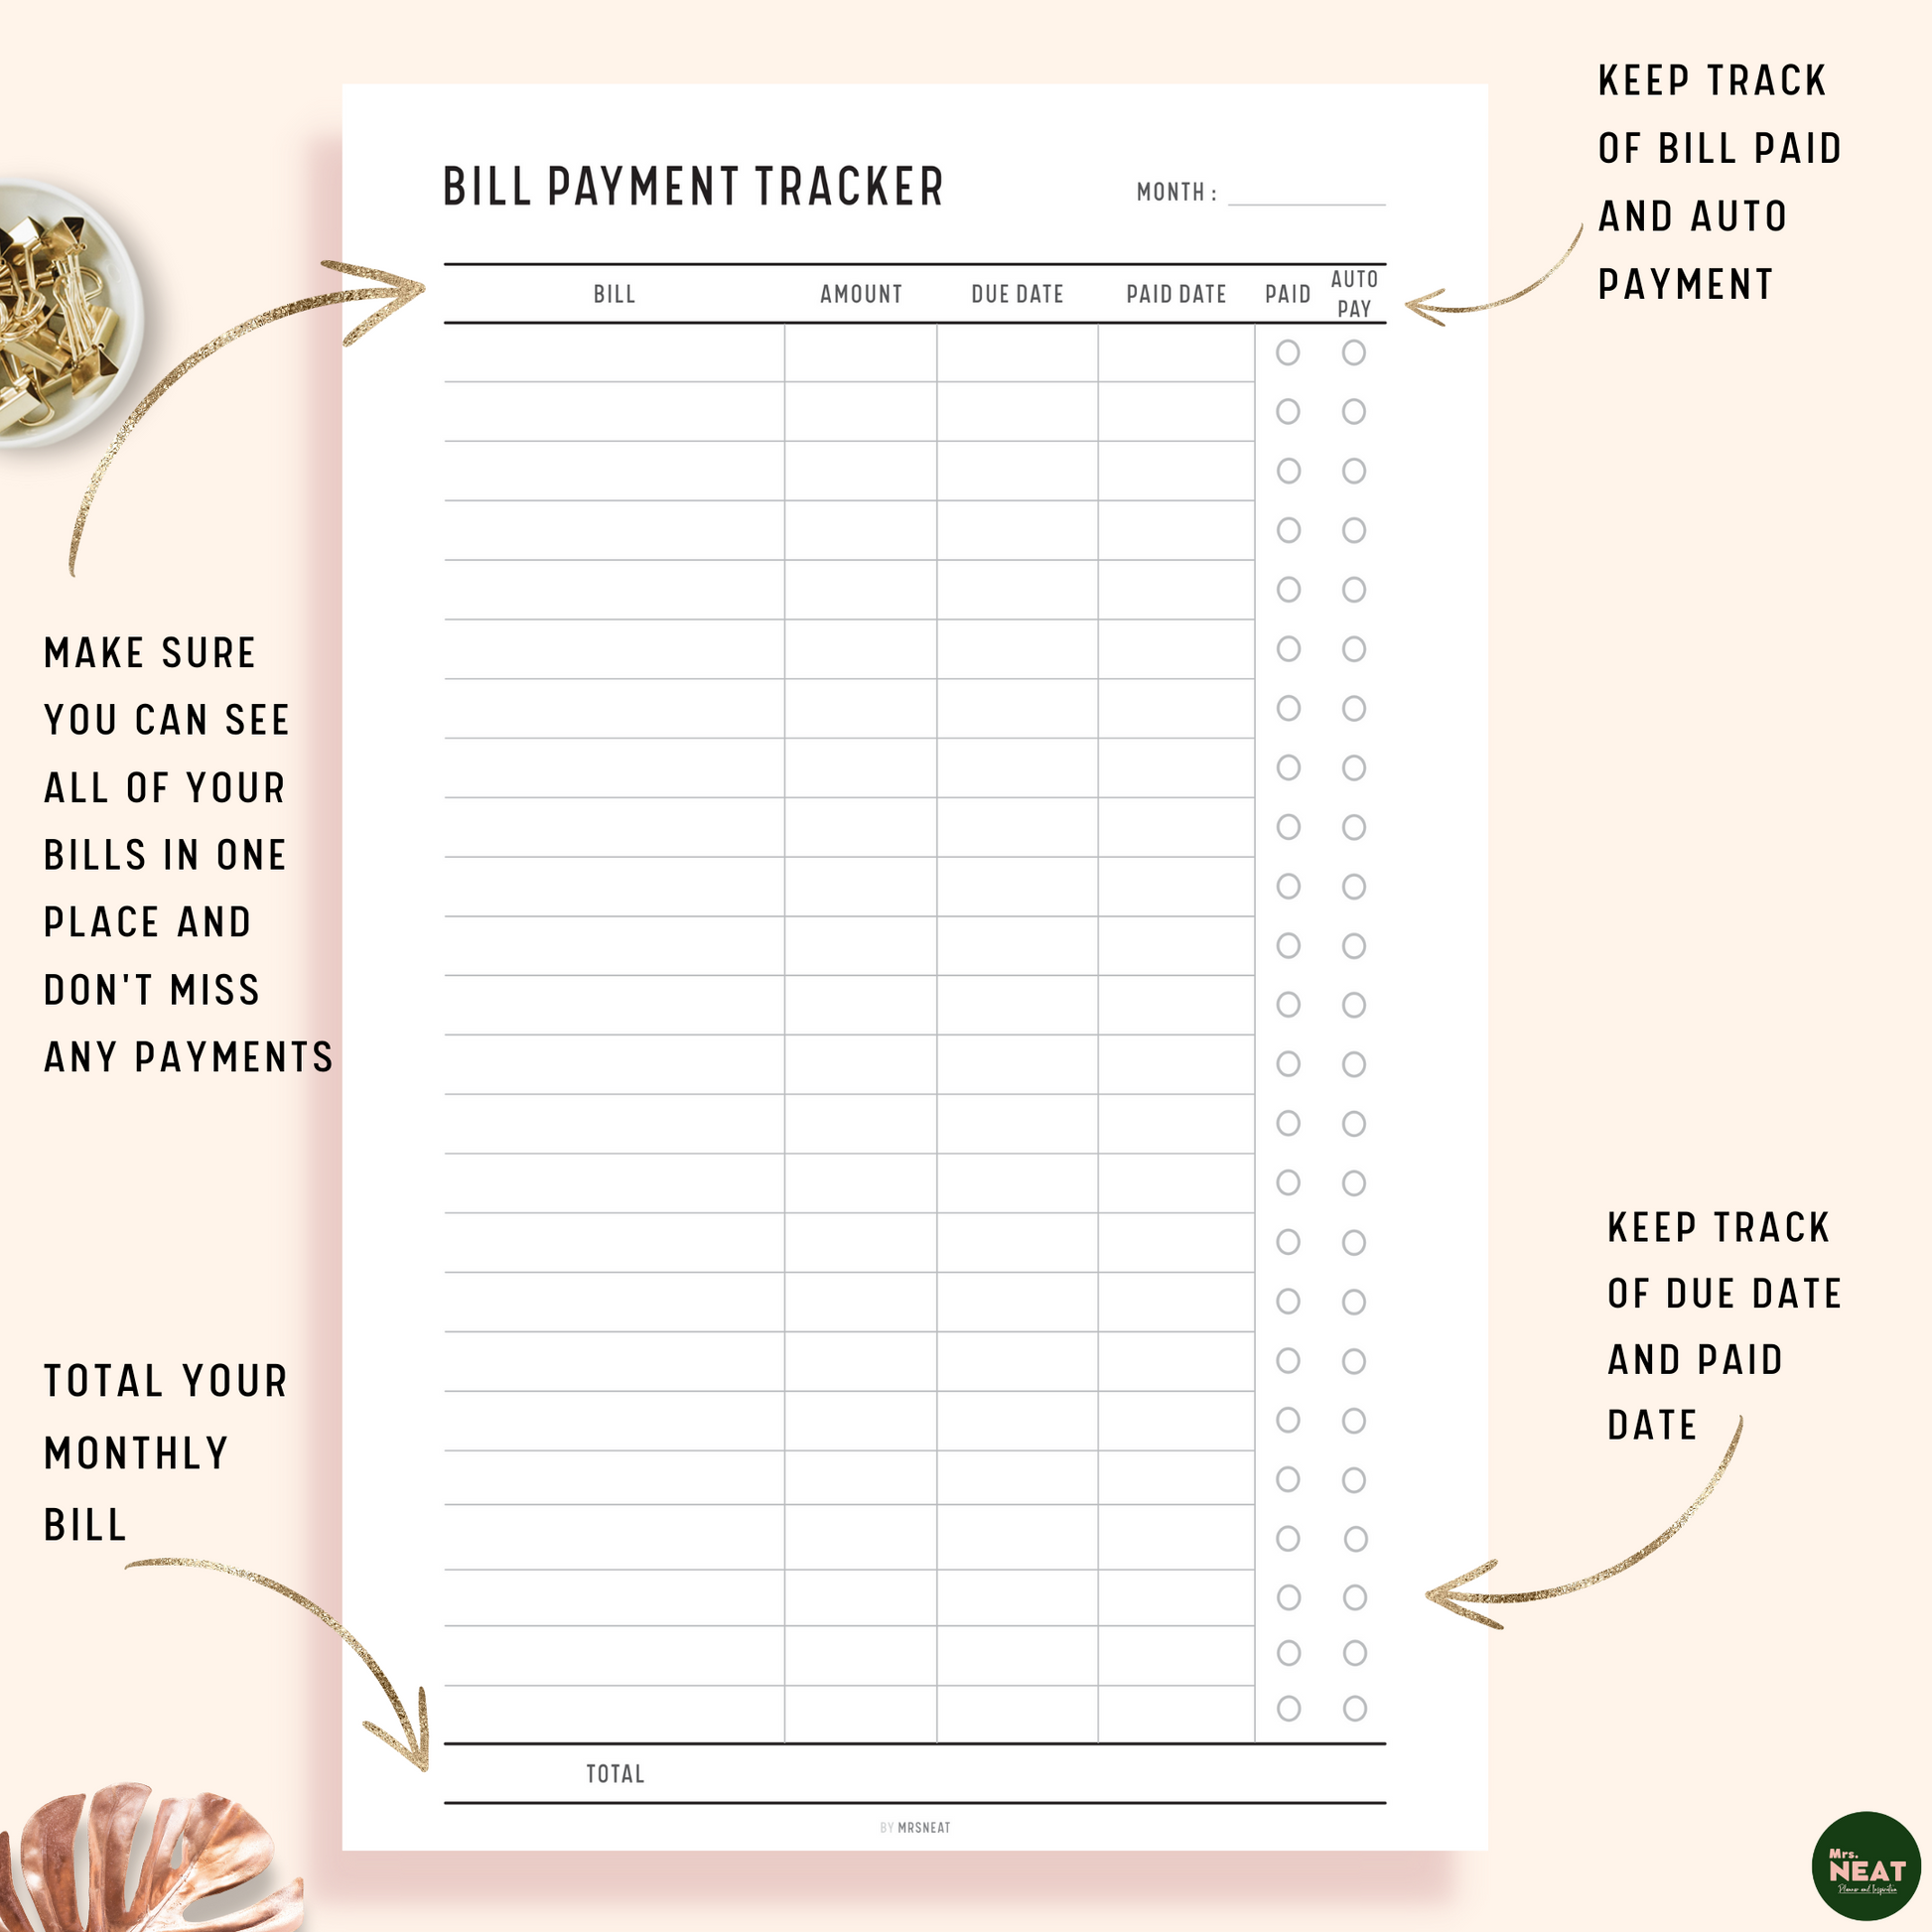 Minimalist Monthly Bill Payment Tracker with room for bills, amount, date and payment options